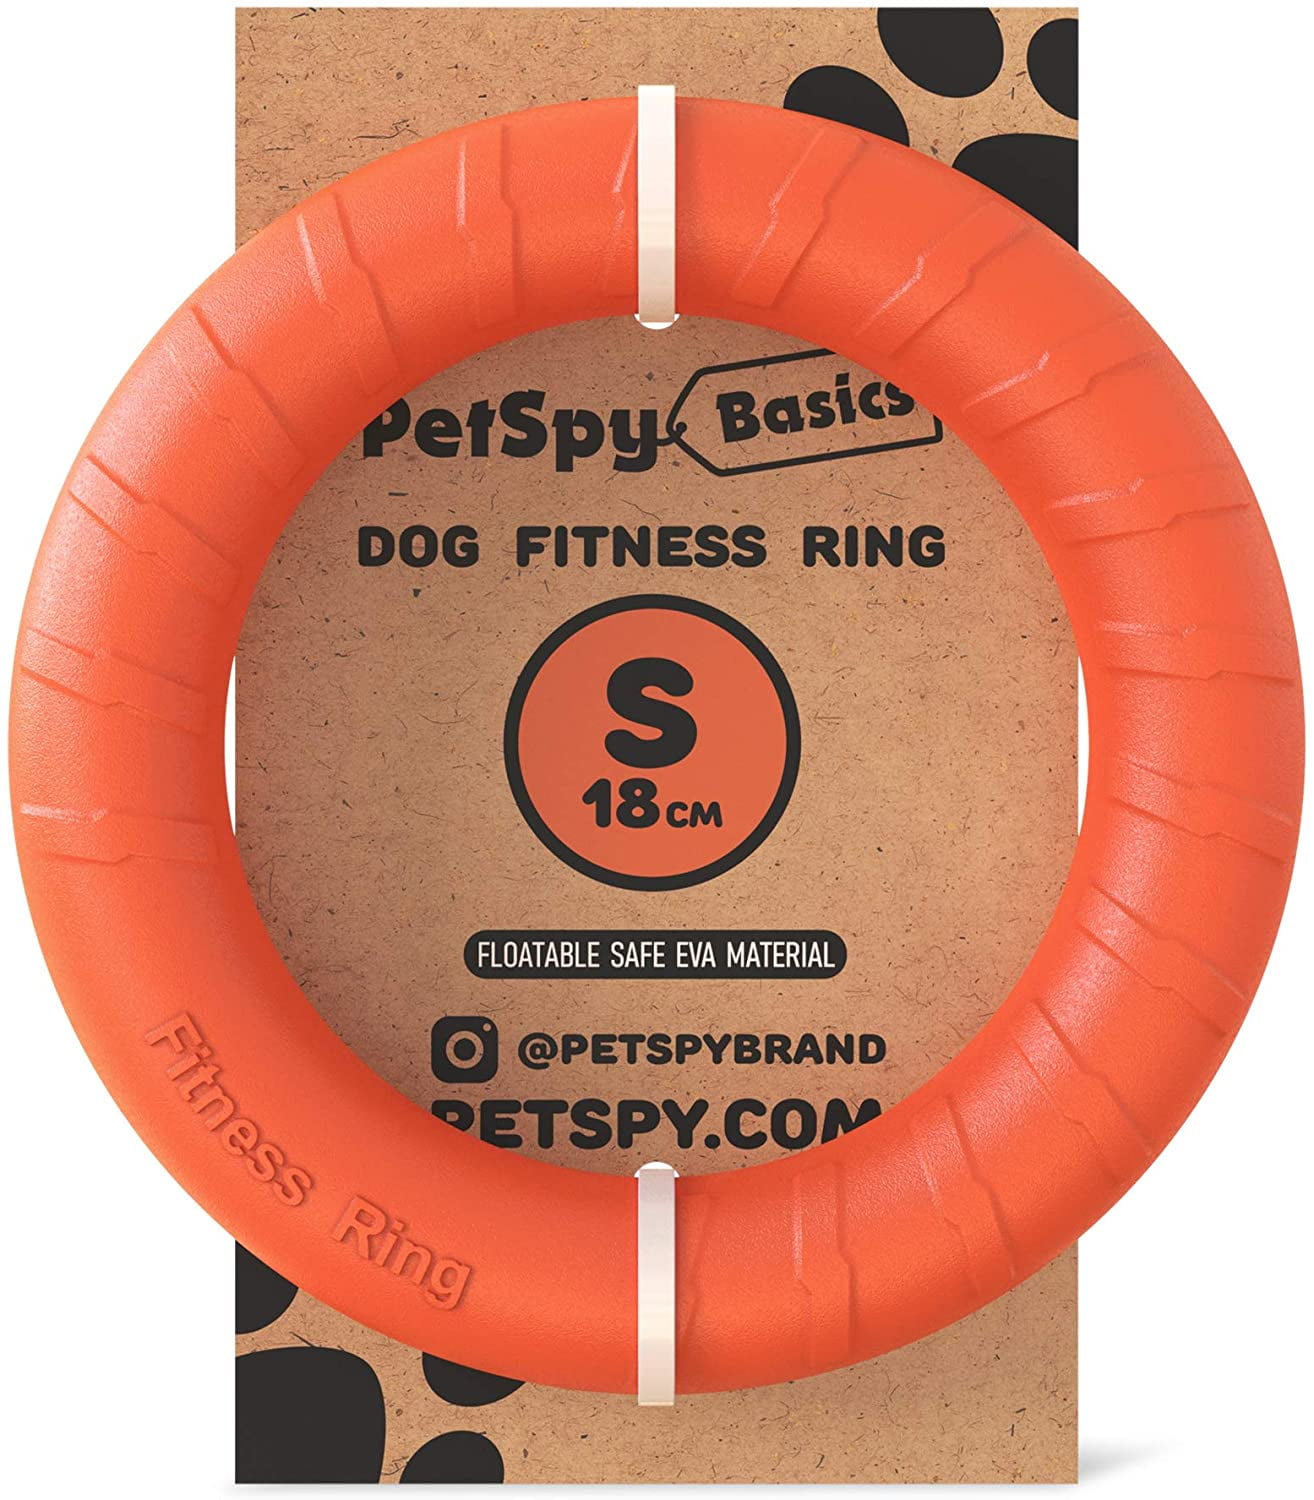 Dog Training Ring Fitness Tool Flying and Floatable Disc Interactive Pet Toy for Small Medium Large Dogs (Small to Medium)